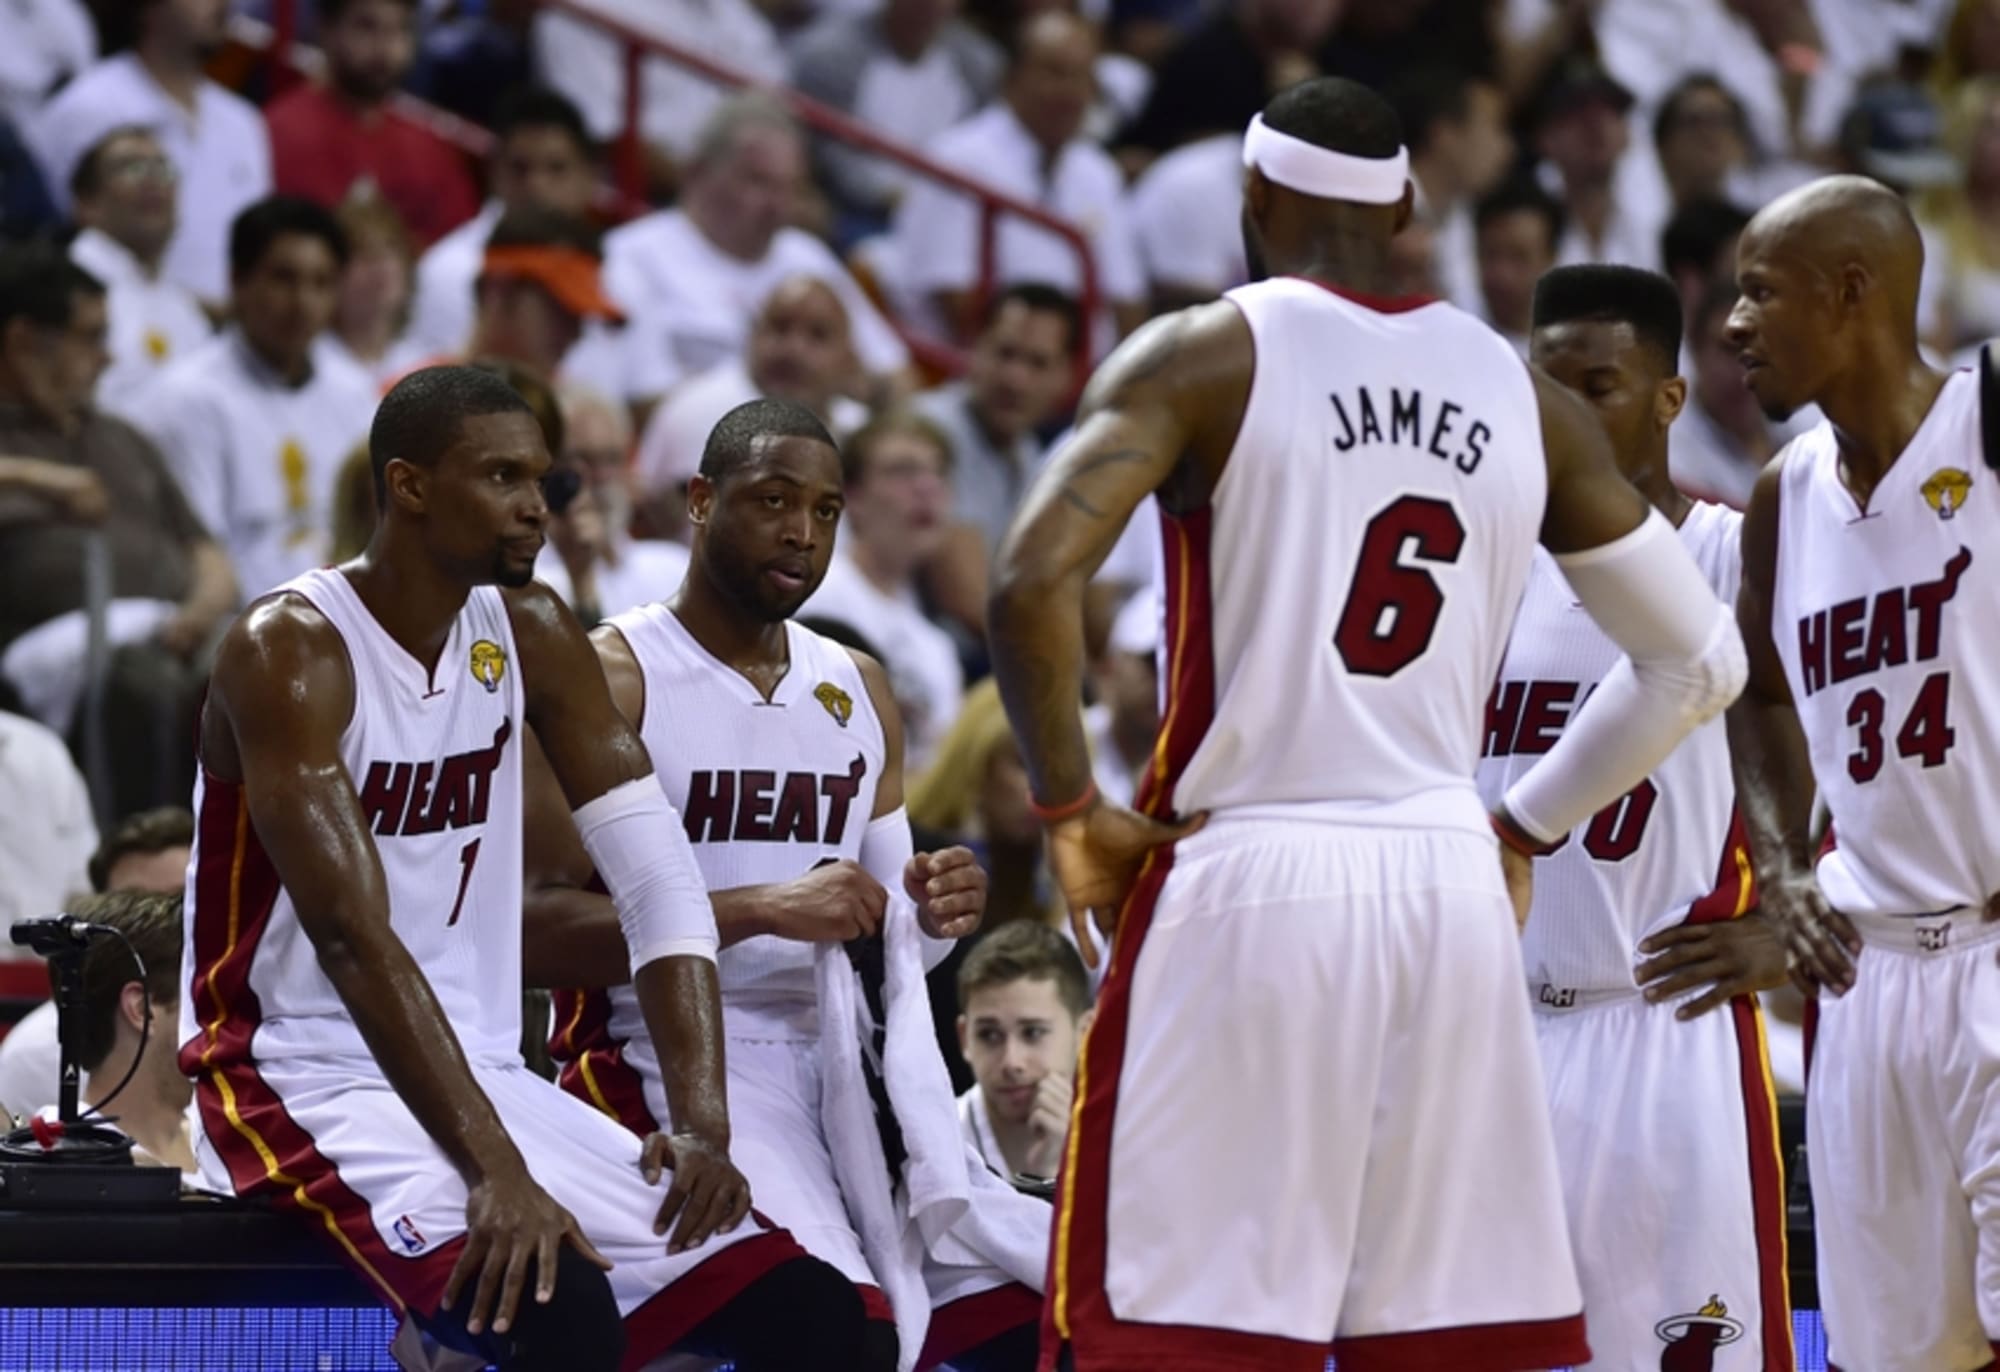 Dwyane Wade on adjusting to playing with LeBron James in Miami